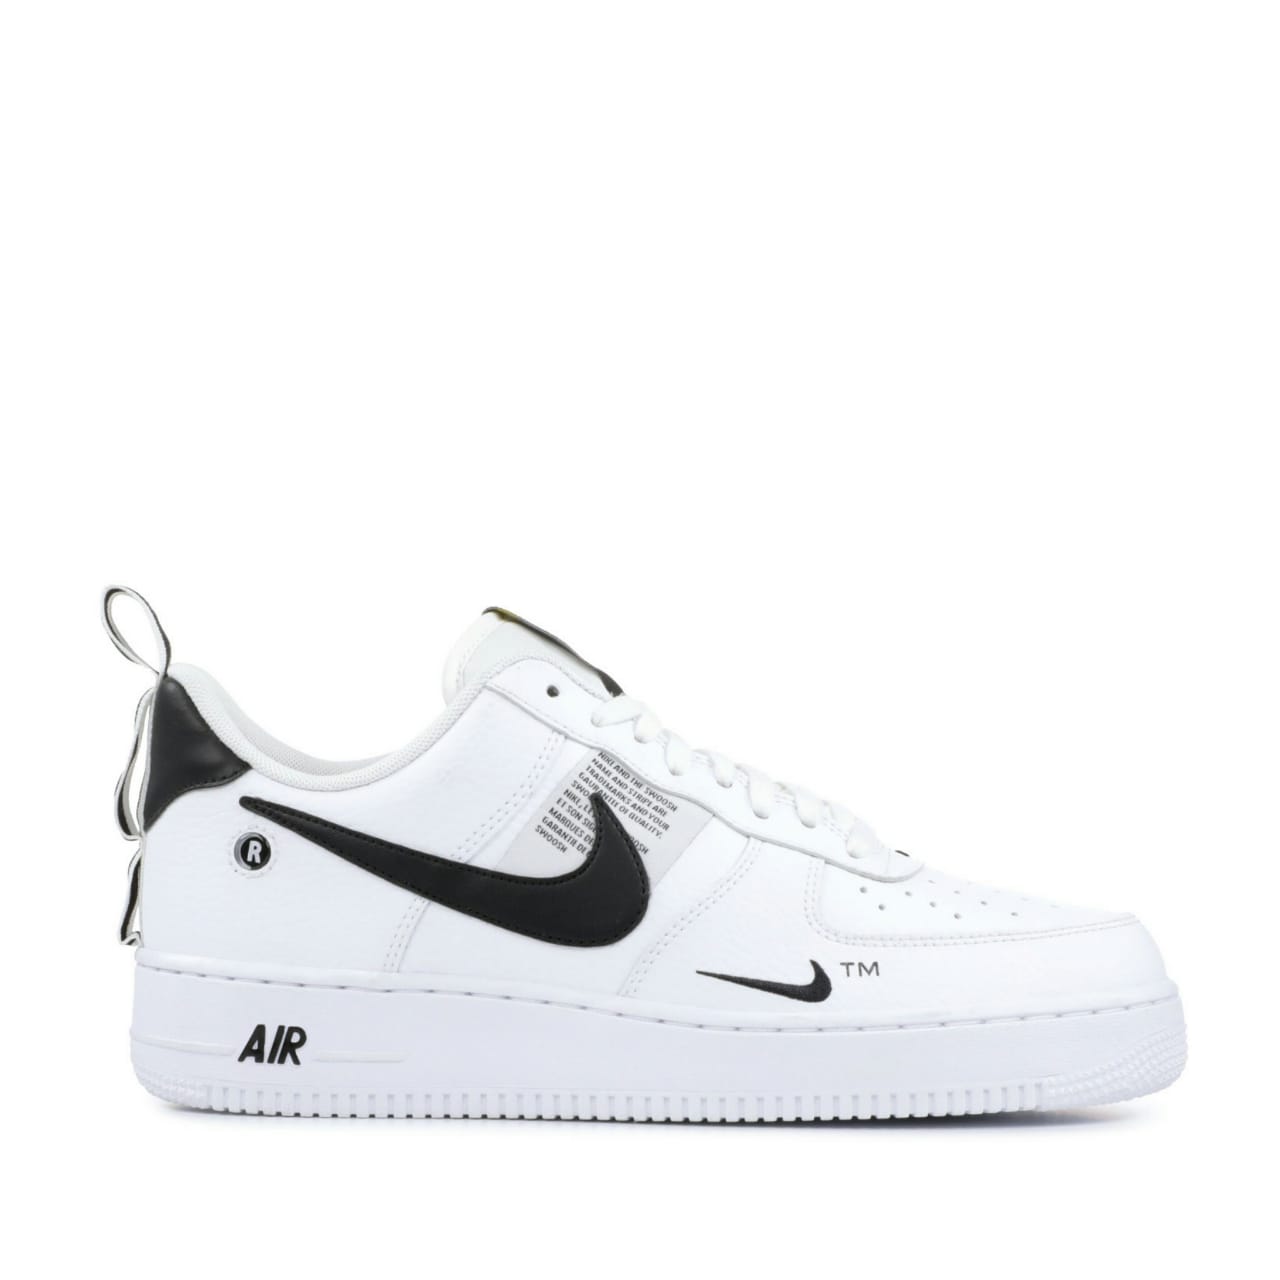 Nike Air Force 1 LV8 Utility GS 'Overbranding